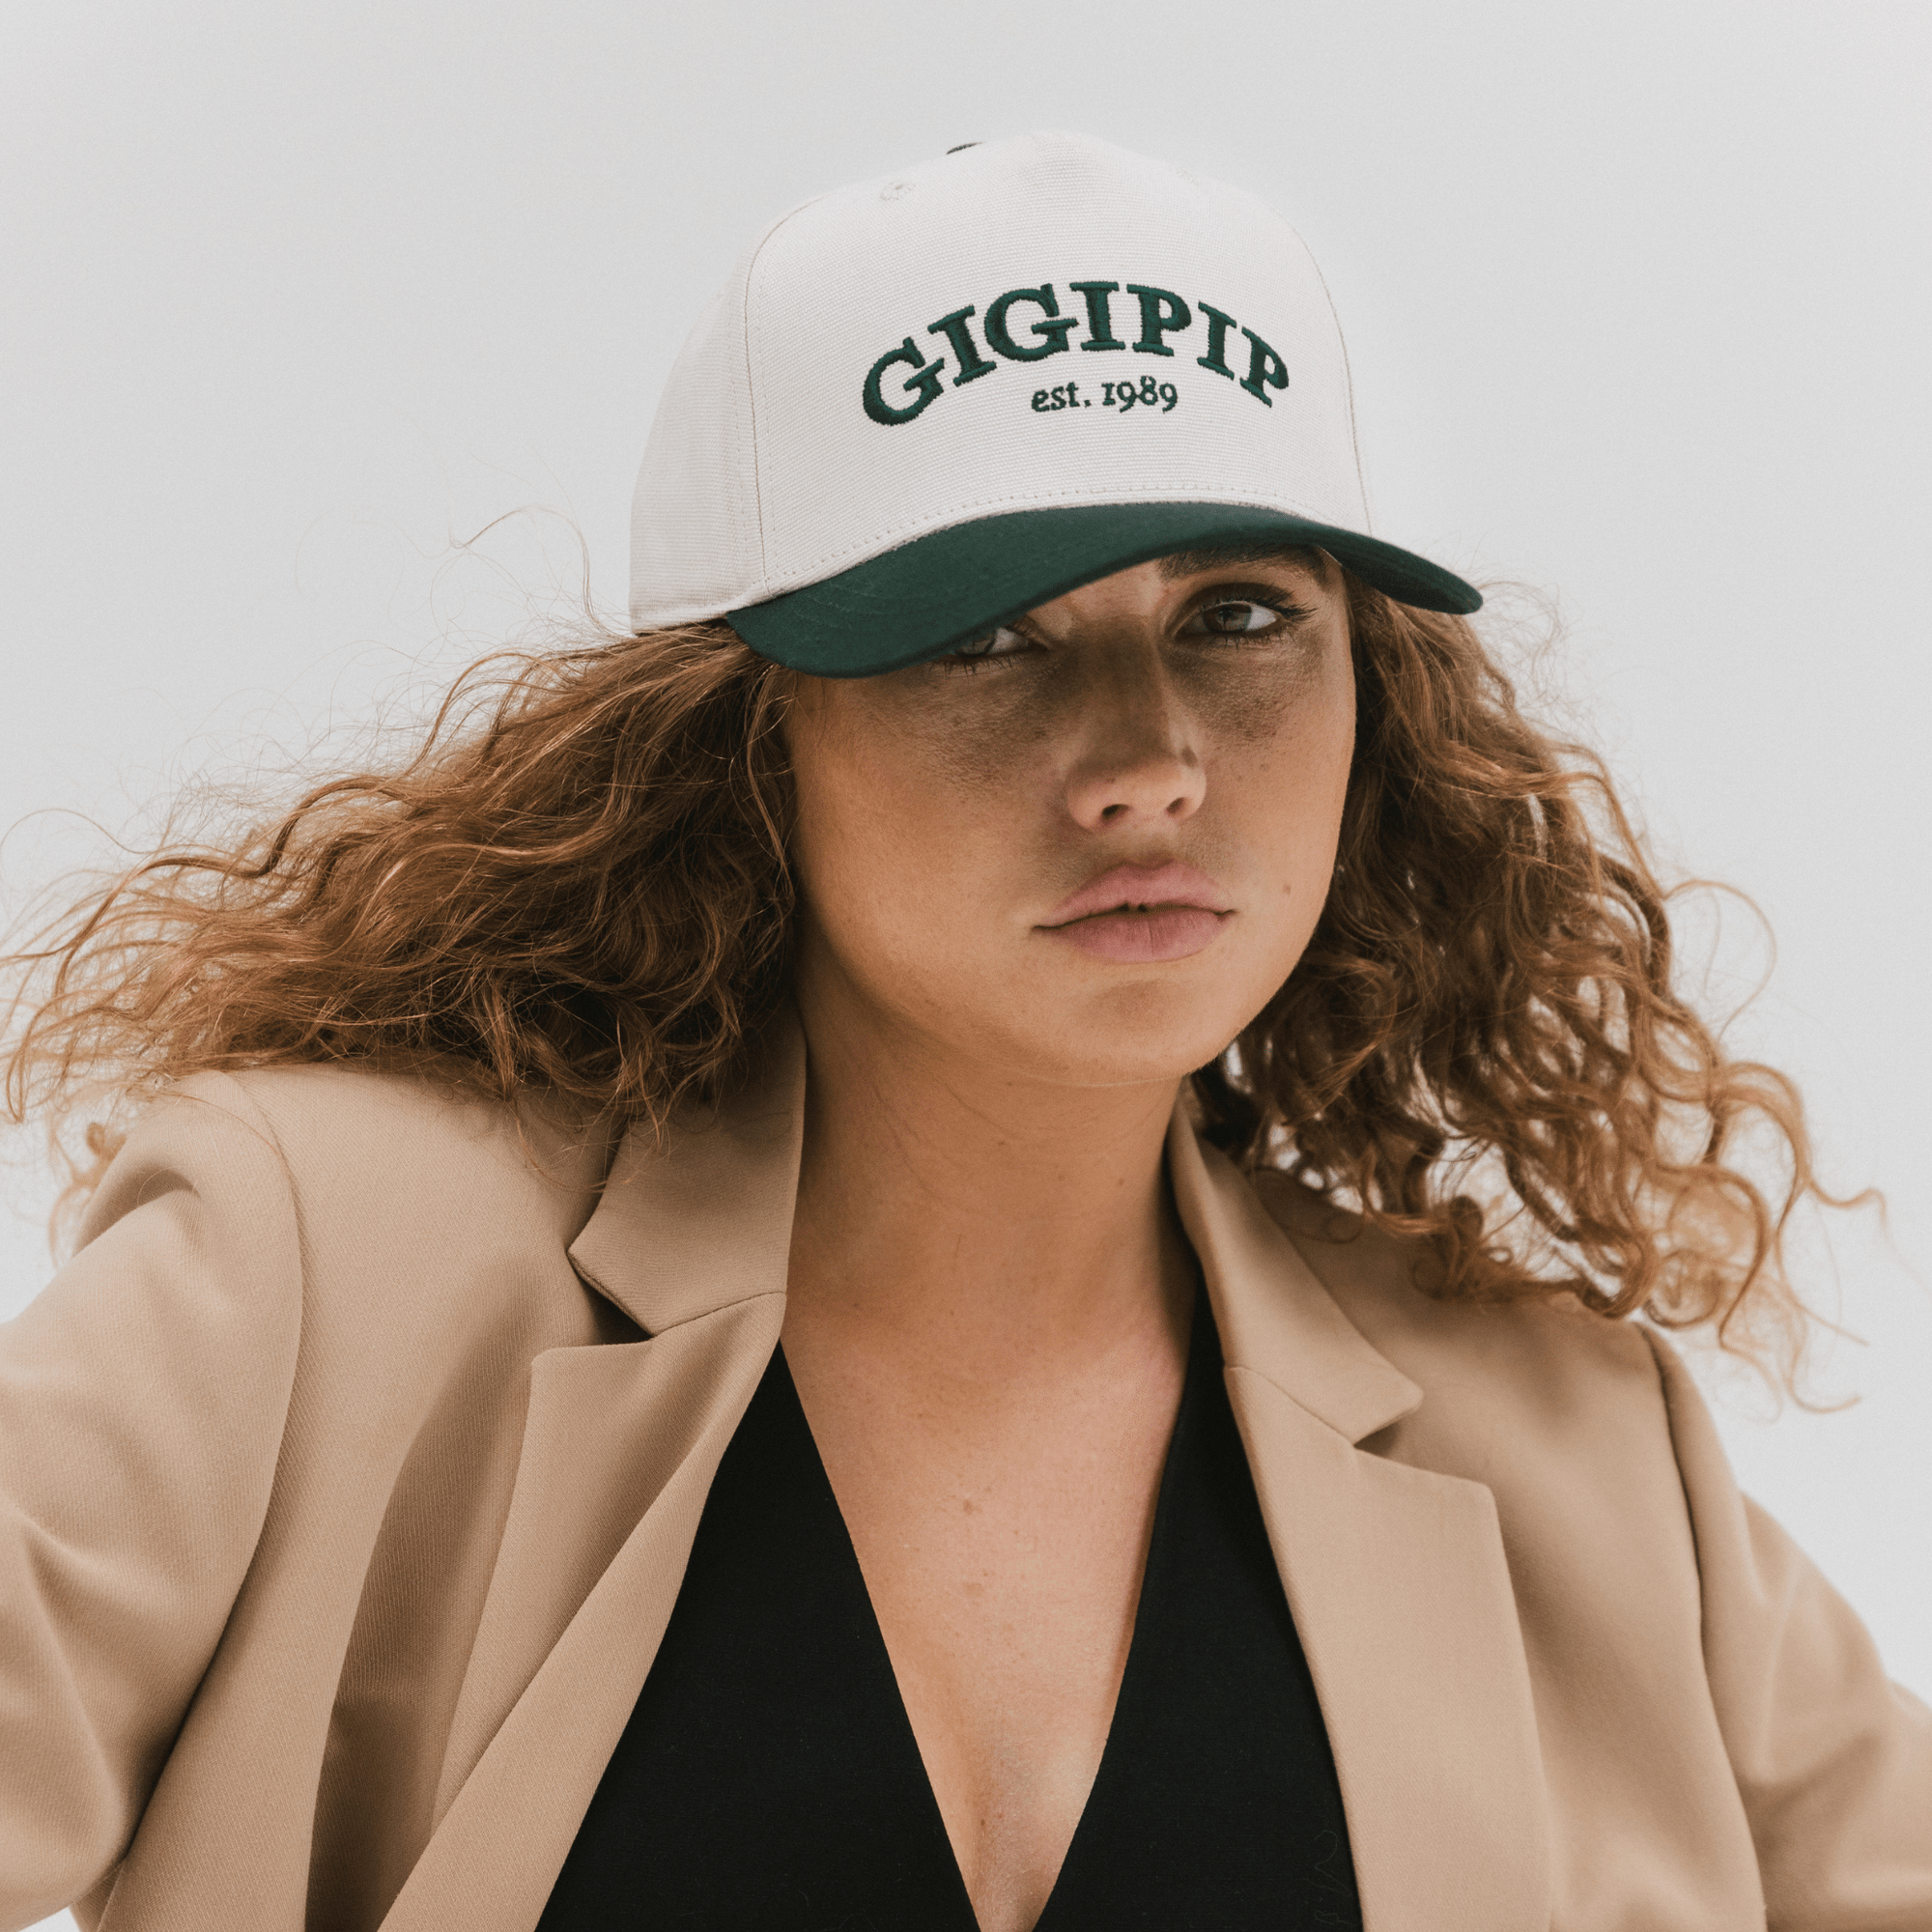 Gigi Pip trucker hats for women - Gigi Pip Canvas Trucker Hat - 100% Cotton Canvas w/ cotton sweatband + reinforced from panel with 100% polyester mesh trucker hats with gigi pip embroidered on the front panel with an adjustable velcro bag [cream]